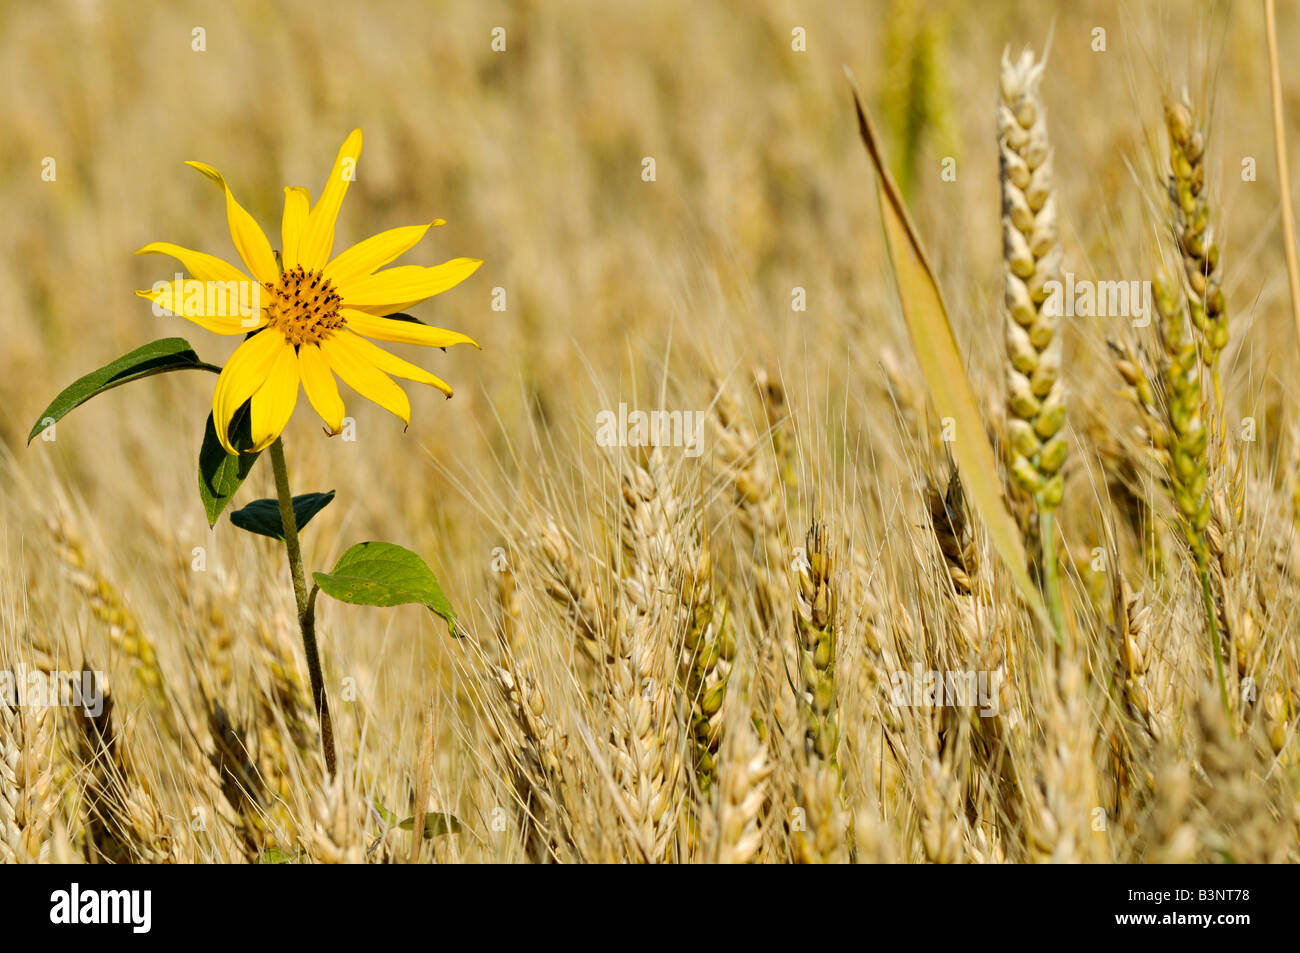 A sunflower in a wheat field Stock Photo